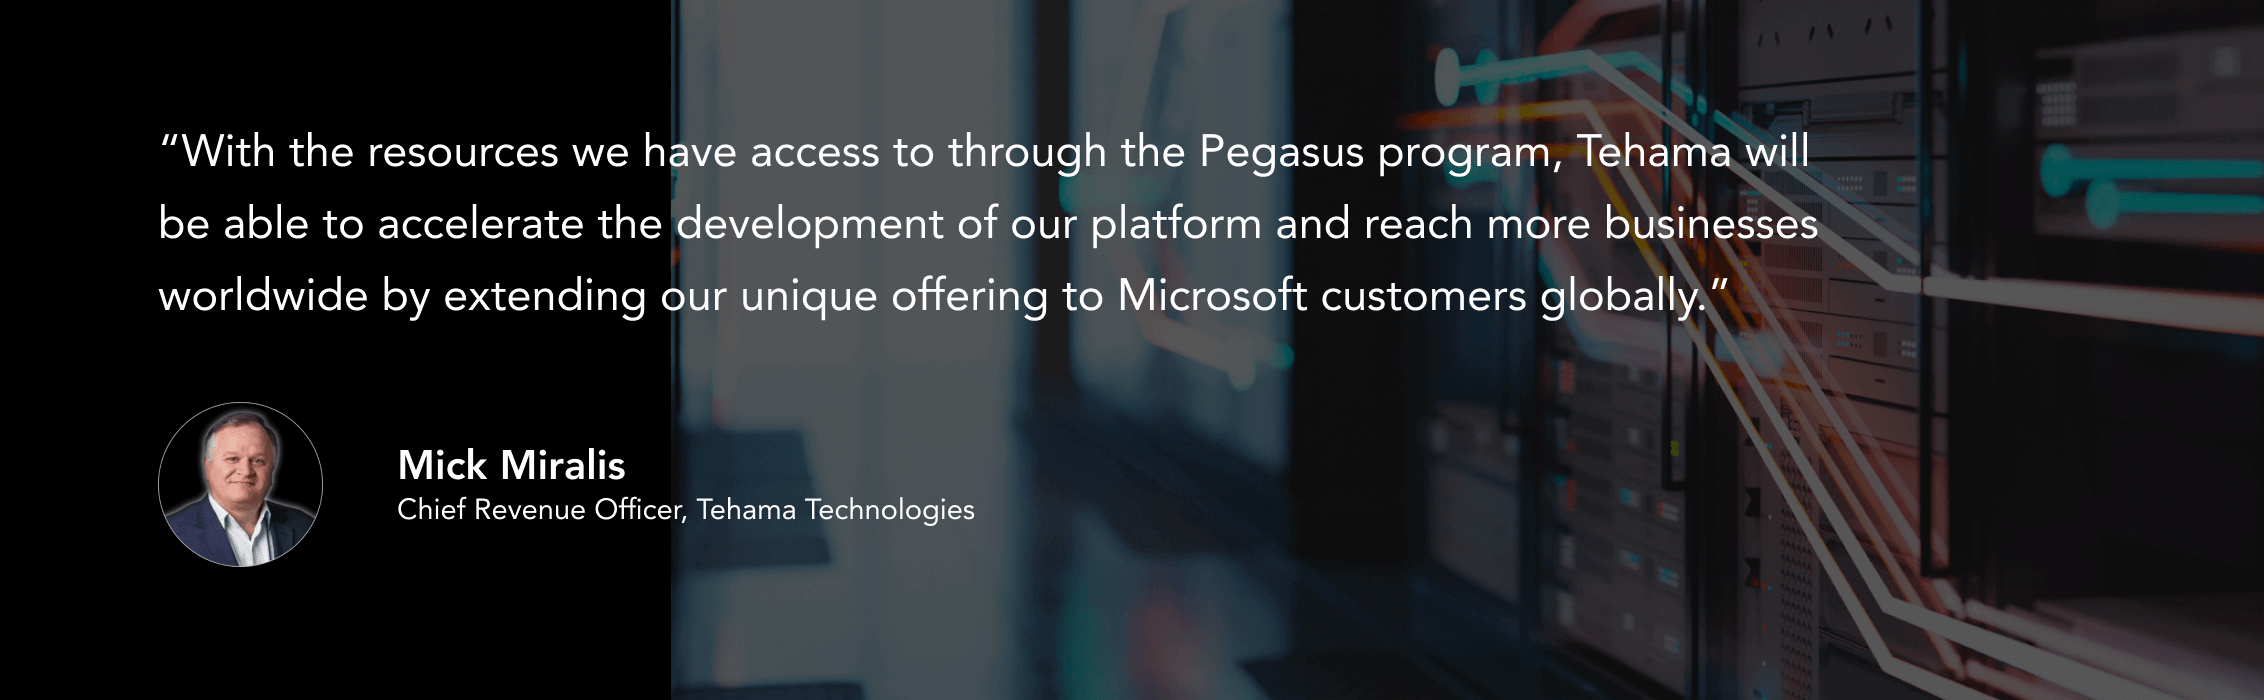 “With the resources we have access to through the Pegasus program, Tehama will be able to accelerate the development of our platform and reach more businesses worldwide by extending our unique offering to Microsoft customers globally.”